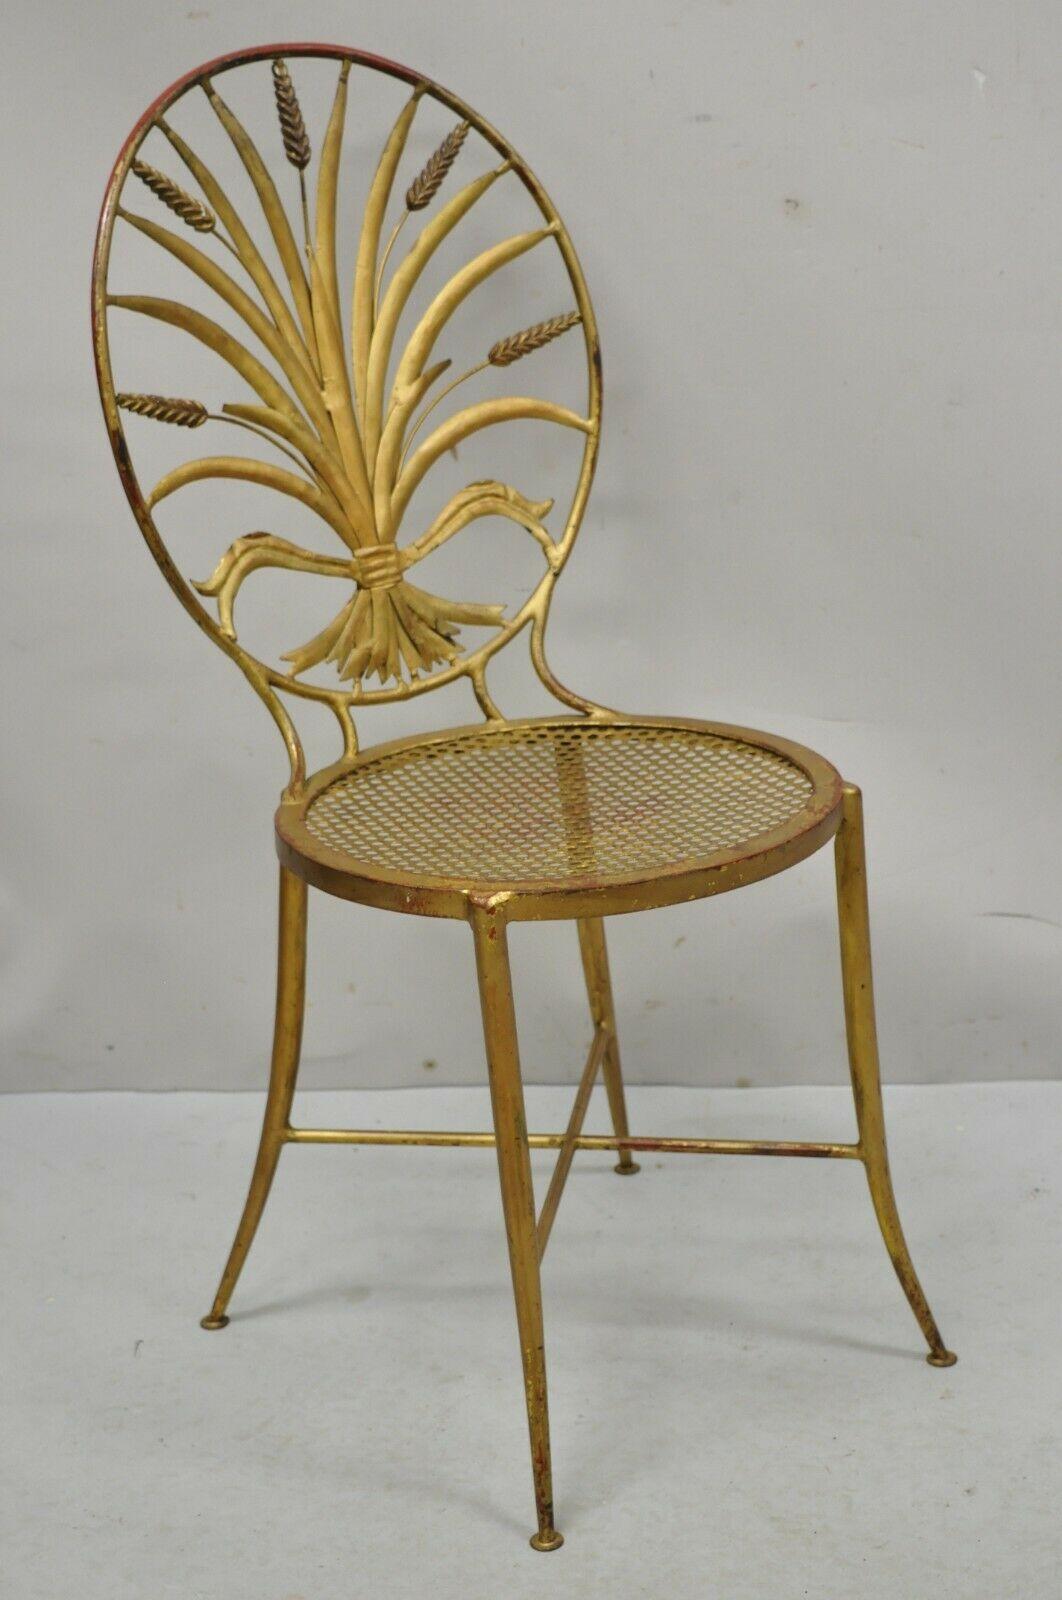 Italian Hollywood Regency iron tole metal gold gilt wheat sheaf Salvador side chair. Item features an oval back with sheaf of wheat design, cross stretcher base, wrought iron construction, gold gilt distressed finish, tapered legs, very nice vintage